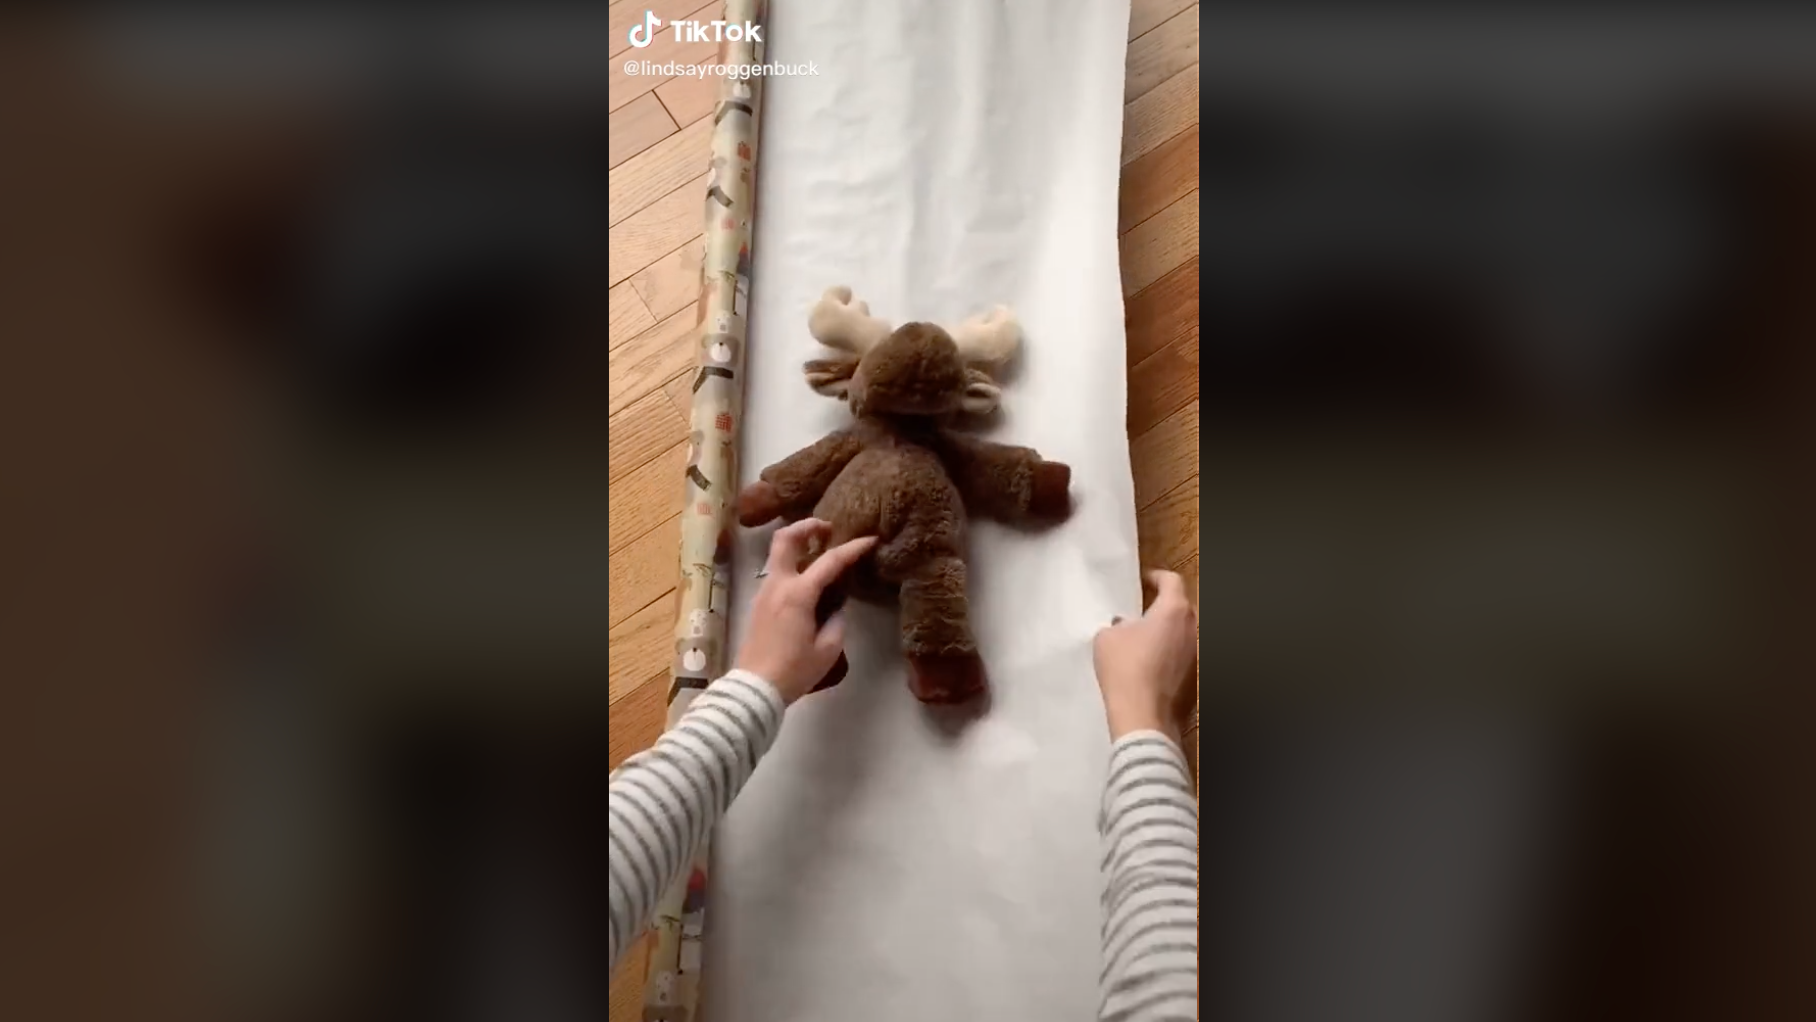 The Best Way to Wrap Oddly Shaped Gifts, According to TikTok